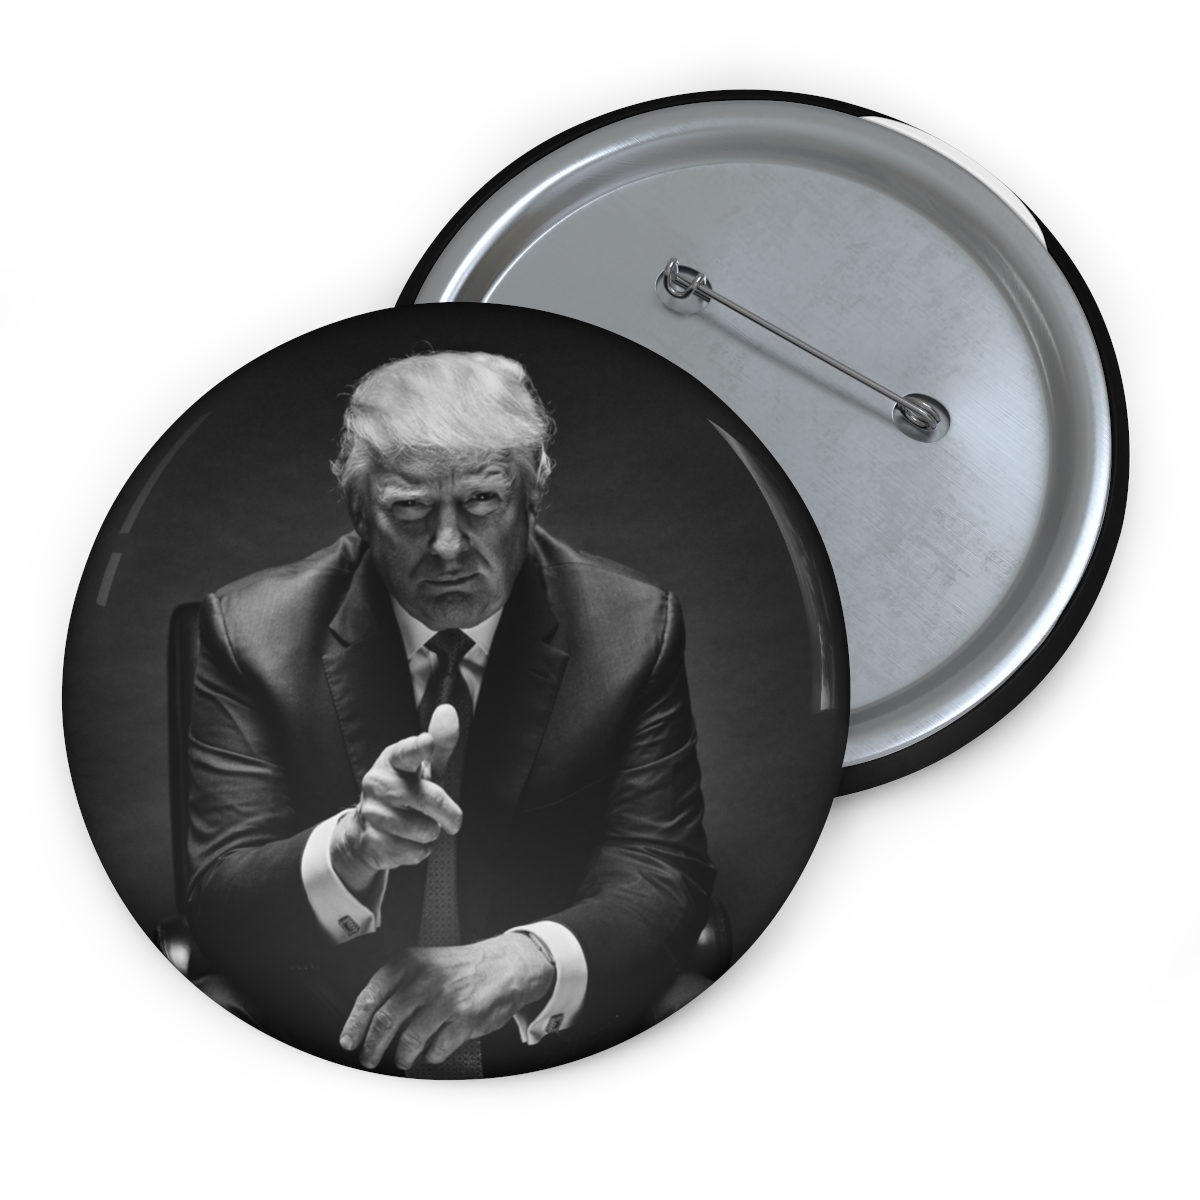 Donald Trump You’re Fired Novelty Pin Button by Trump is Punk Rock